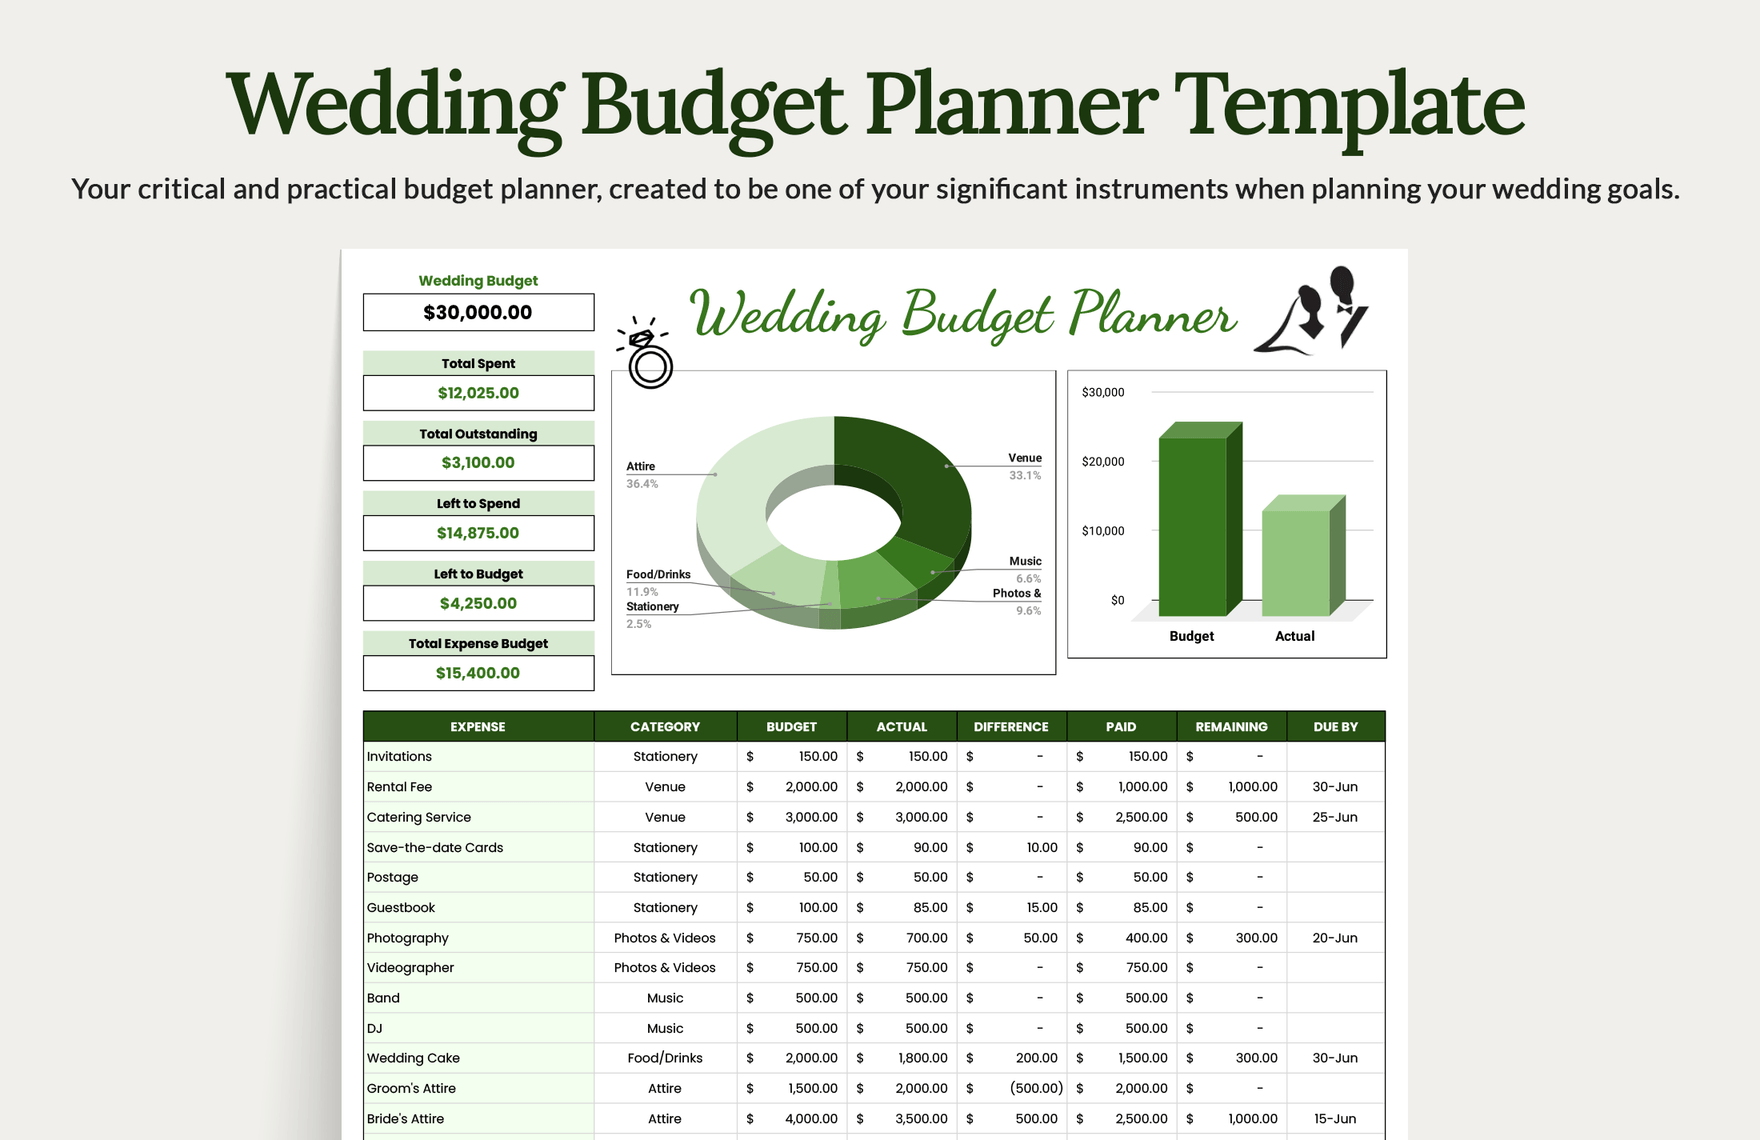 Wedding Budget Planner Template - Download in Word, Google Docs, Excel, PDF, Google Sheets, Apple Pages